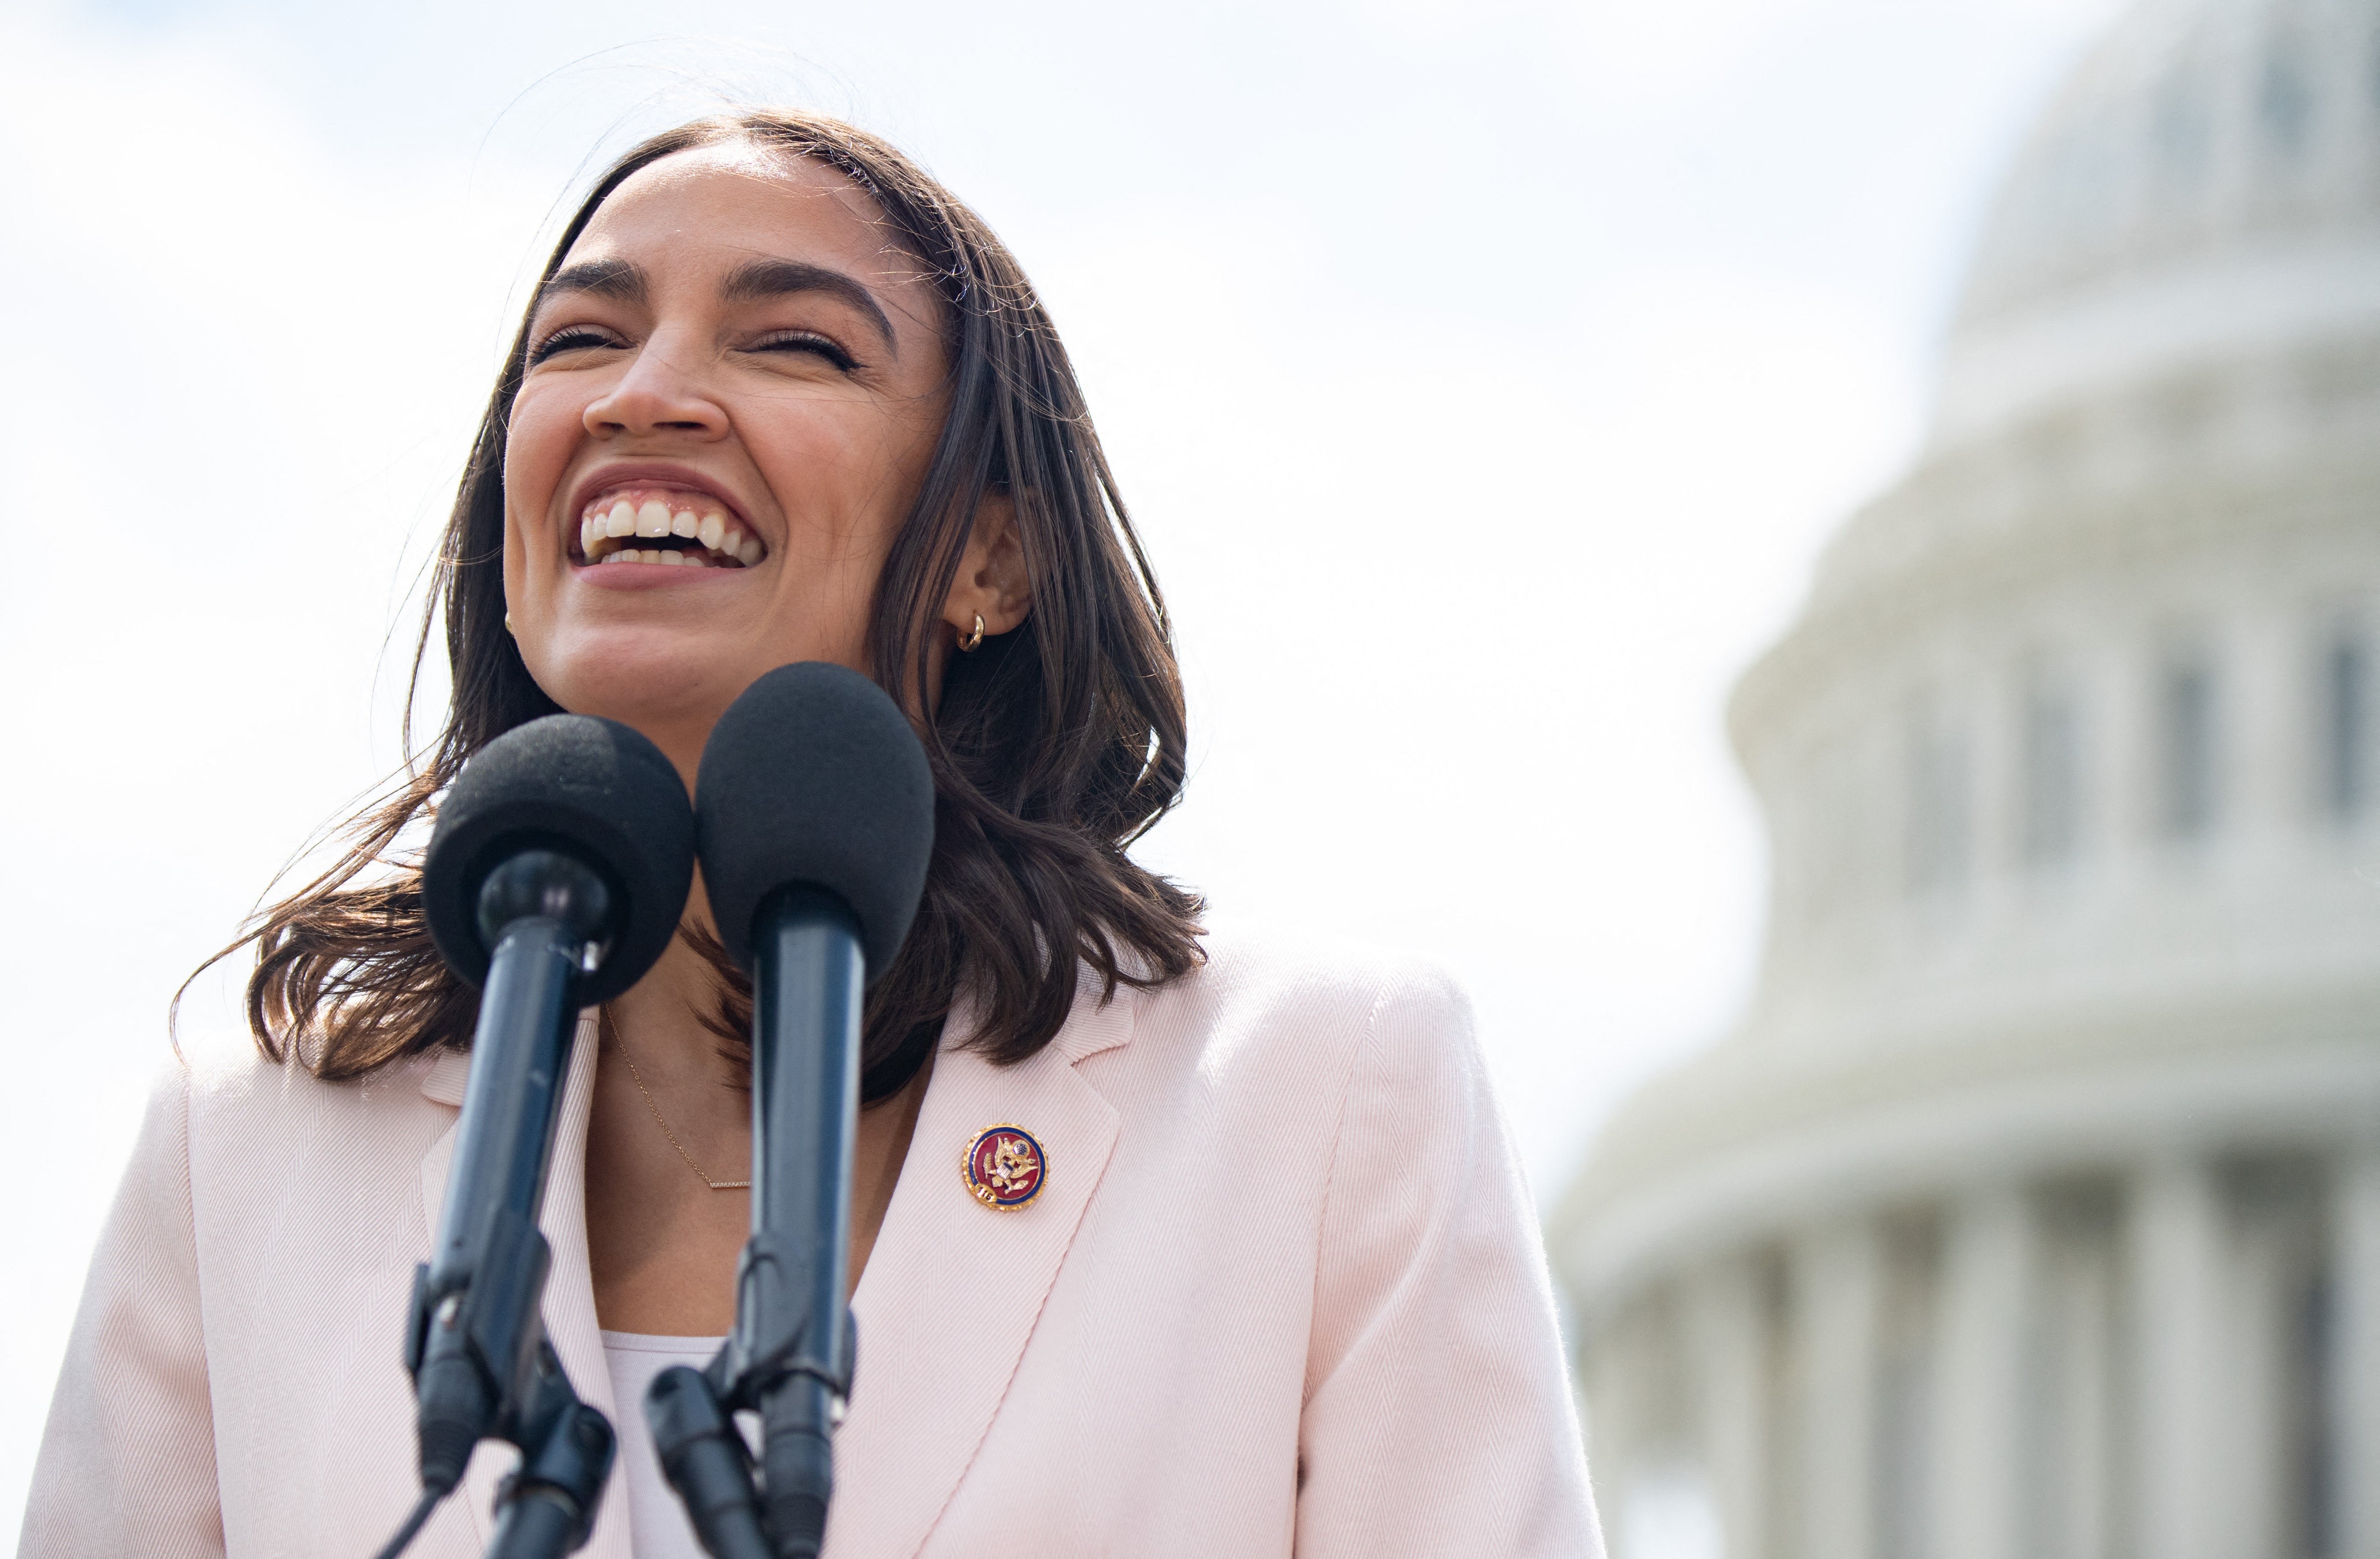 File Image: US Representative Alexandria Ocasio-Cortez, Democrat of New York, attends a press conference about a postal banking pilot program outside the US Capitol in Washington, DC, 15 April 2021